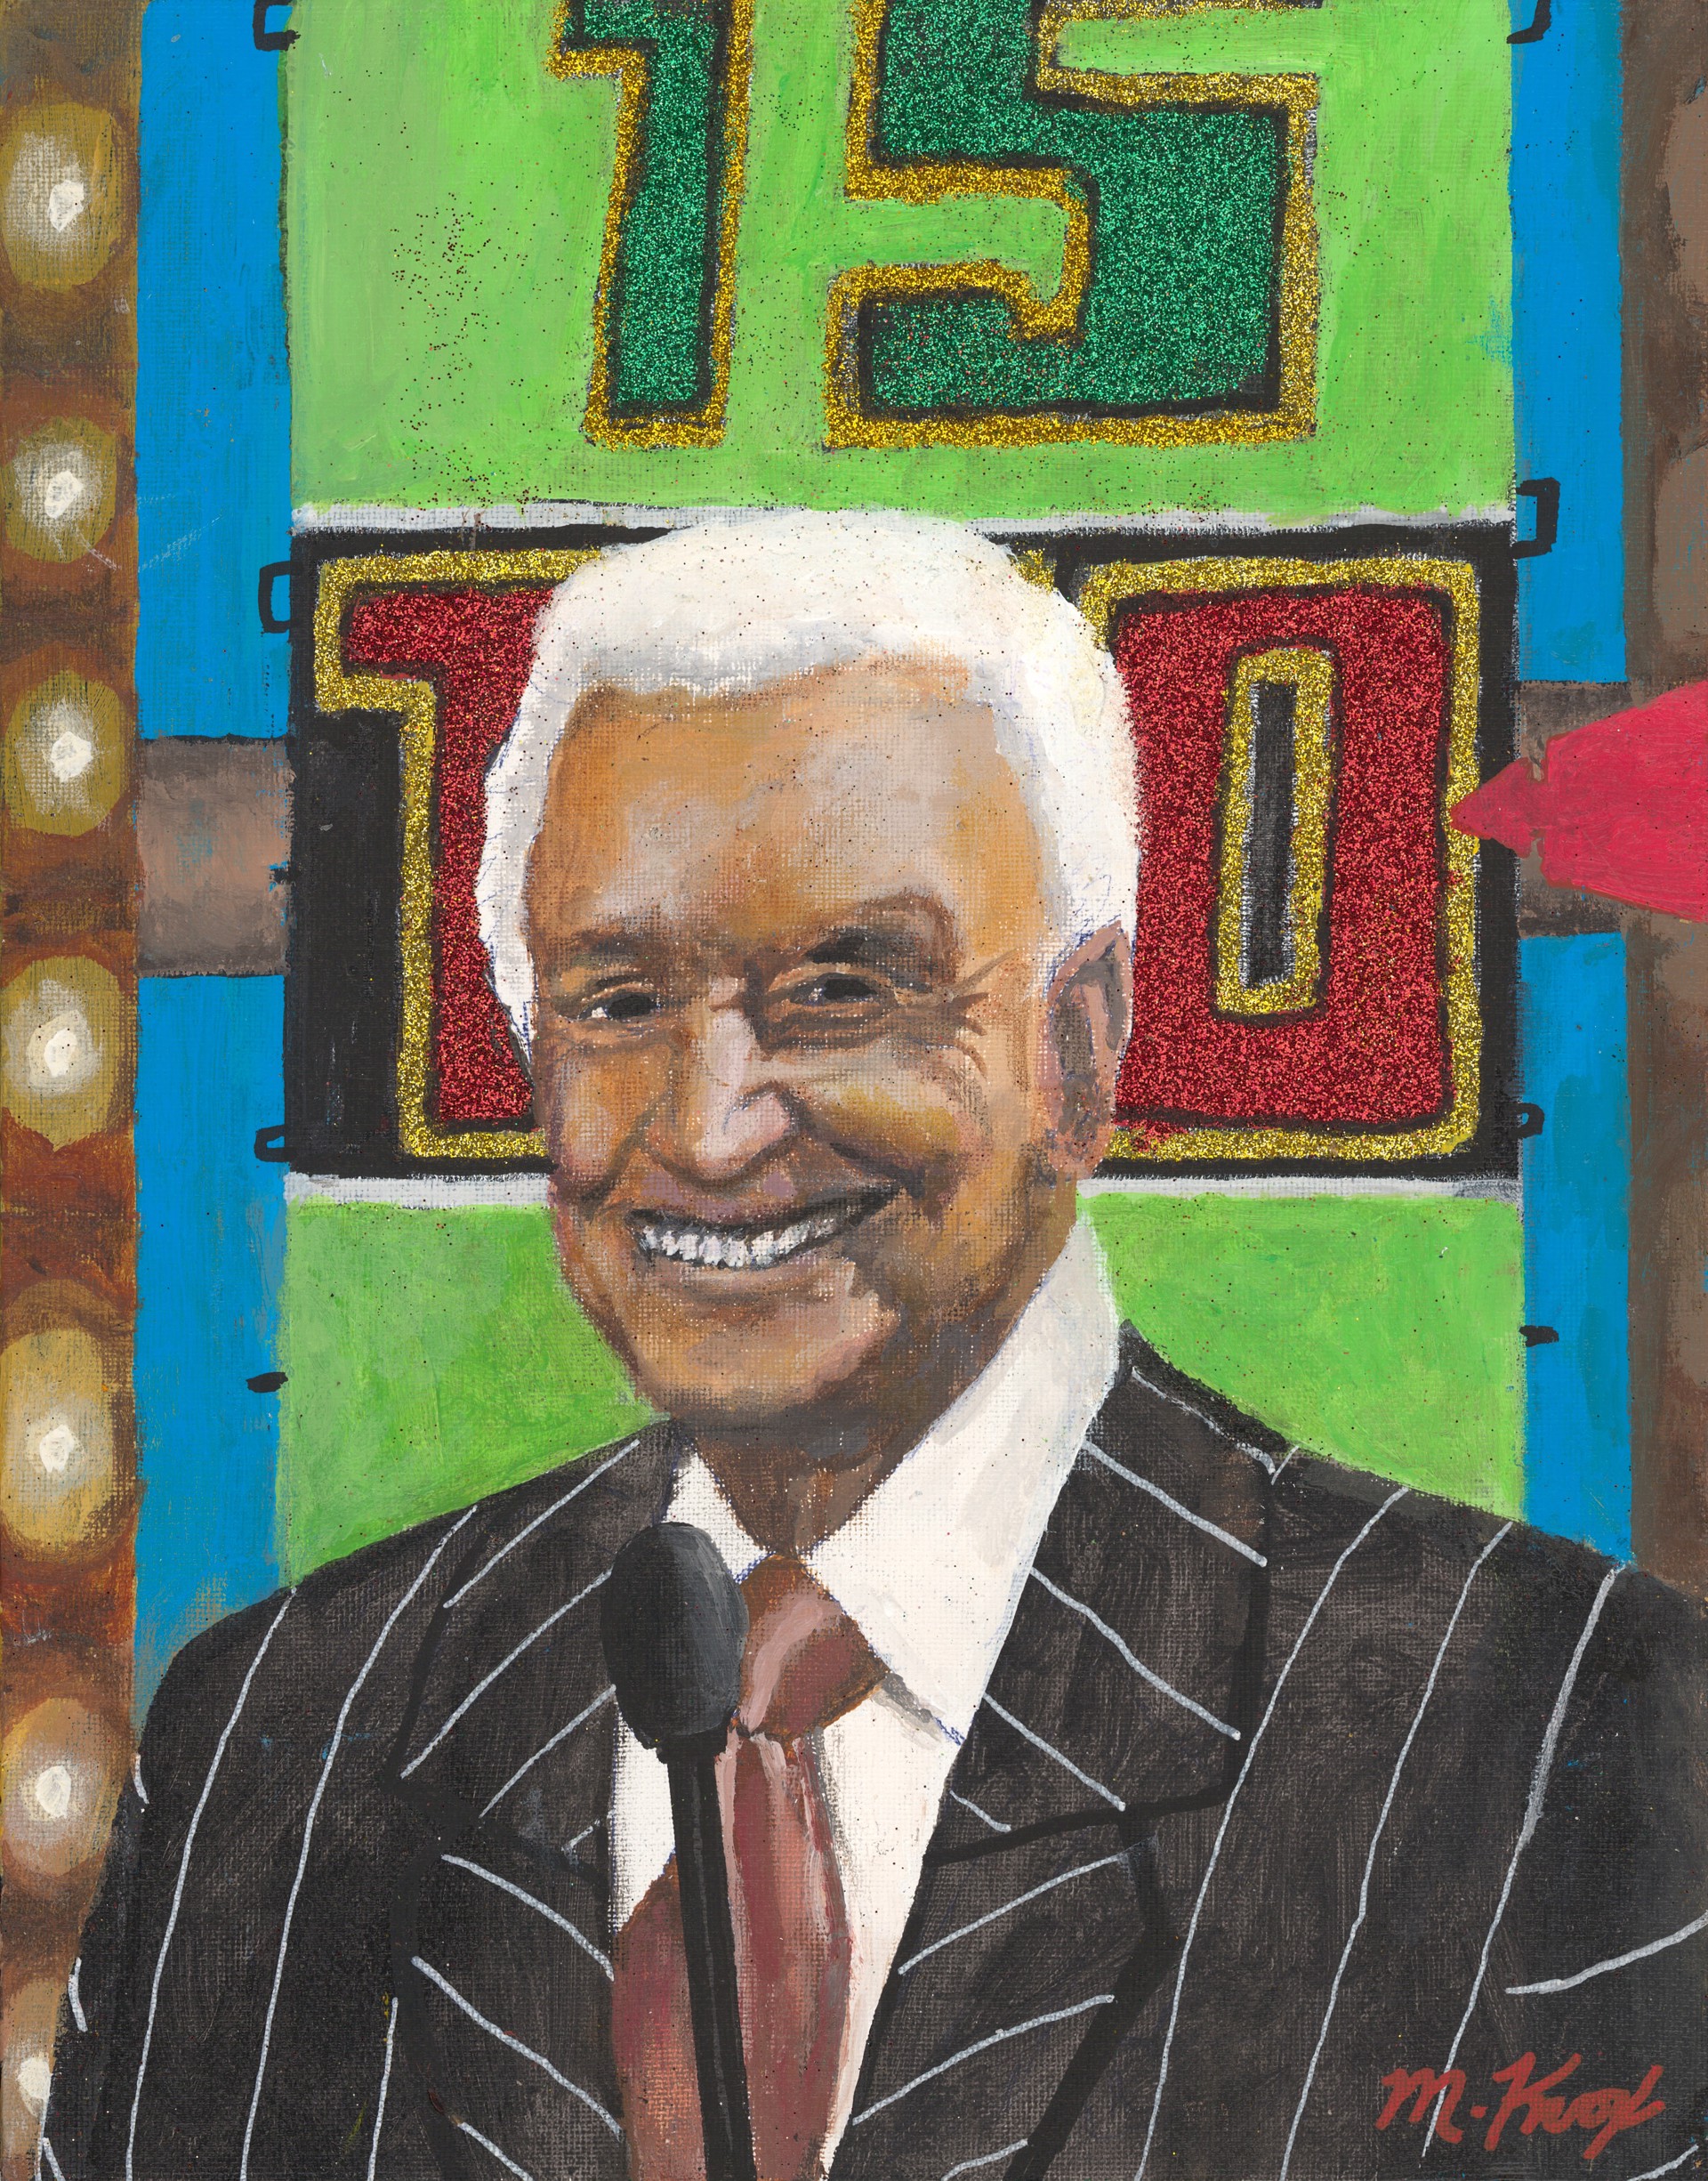 Come On Down! It's a Loving Tribute to Bob Barker! (FRAMED) by Mike Knox